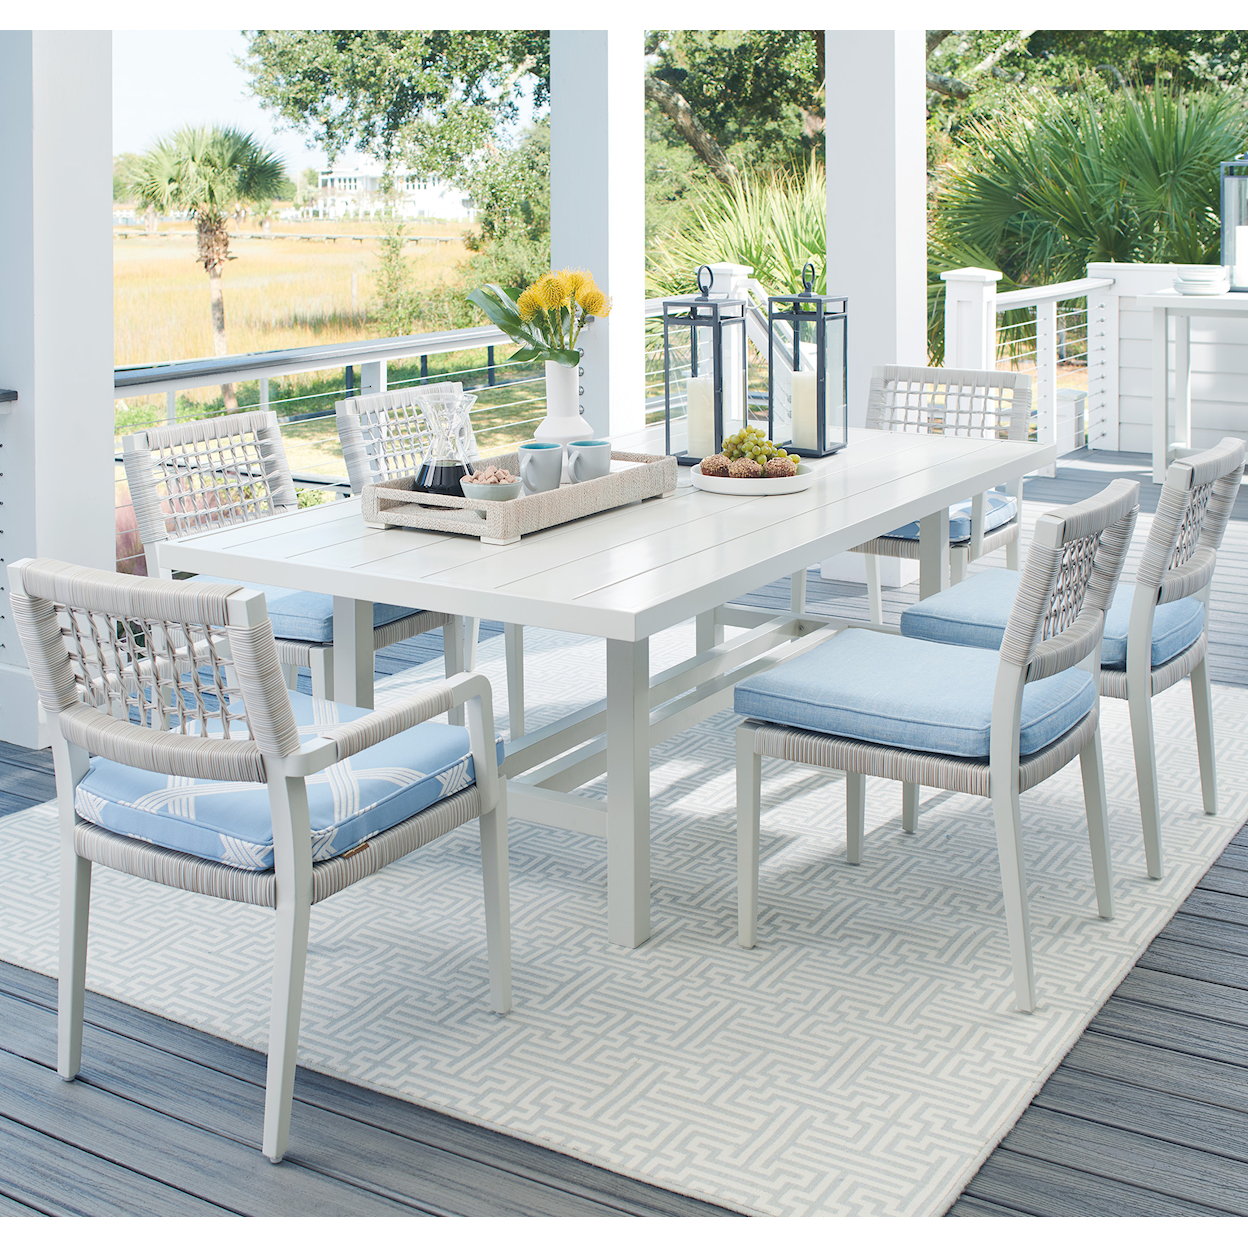 Tommy Bahama Outdoor Living Seabrook 7-Piece Coastal Outdoor Dining Set